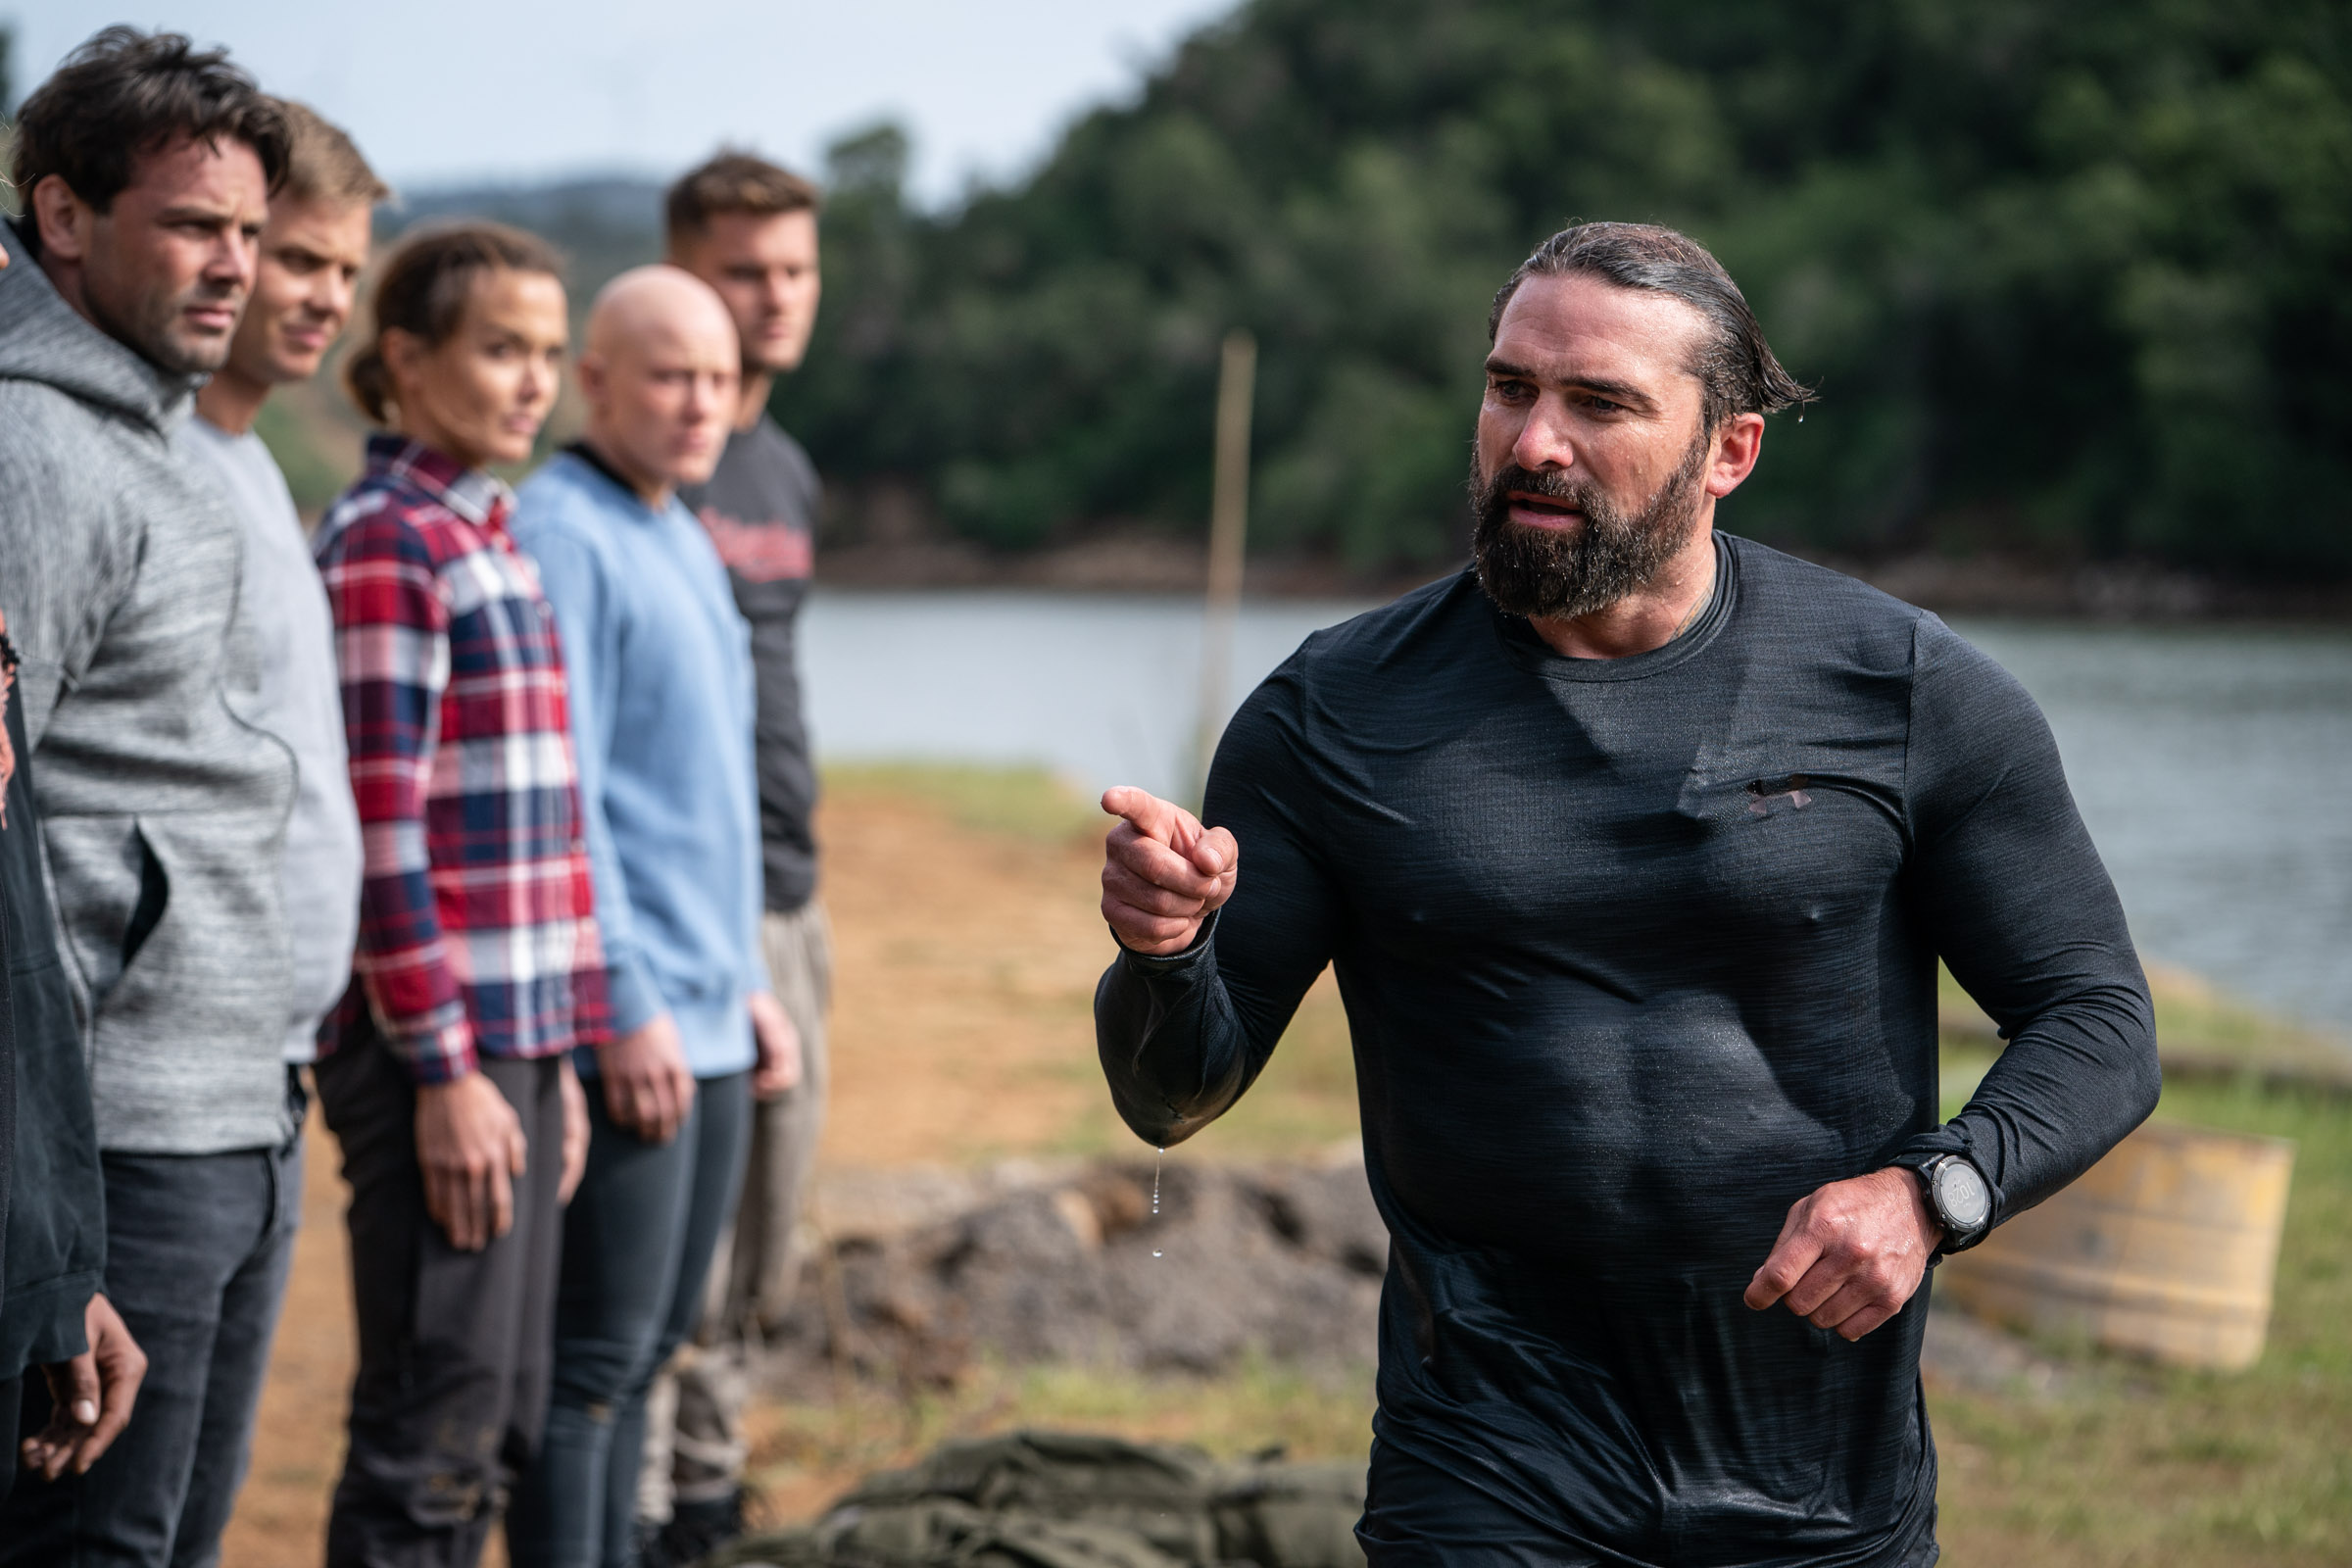  Chief Instructor Ant Middleton meets the recruits  Episode 1 - Courage  Minnow Films / Channel 4 